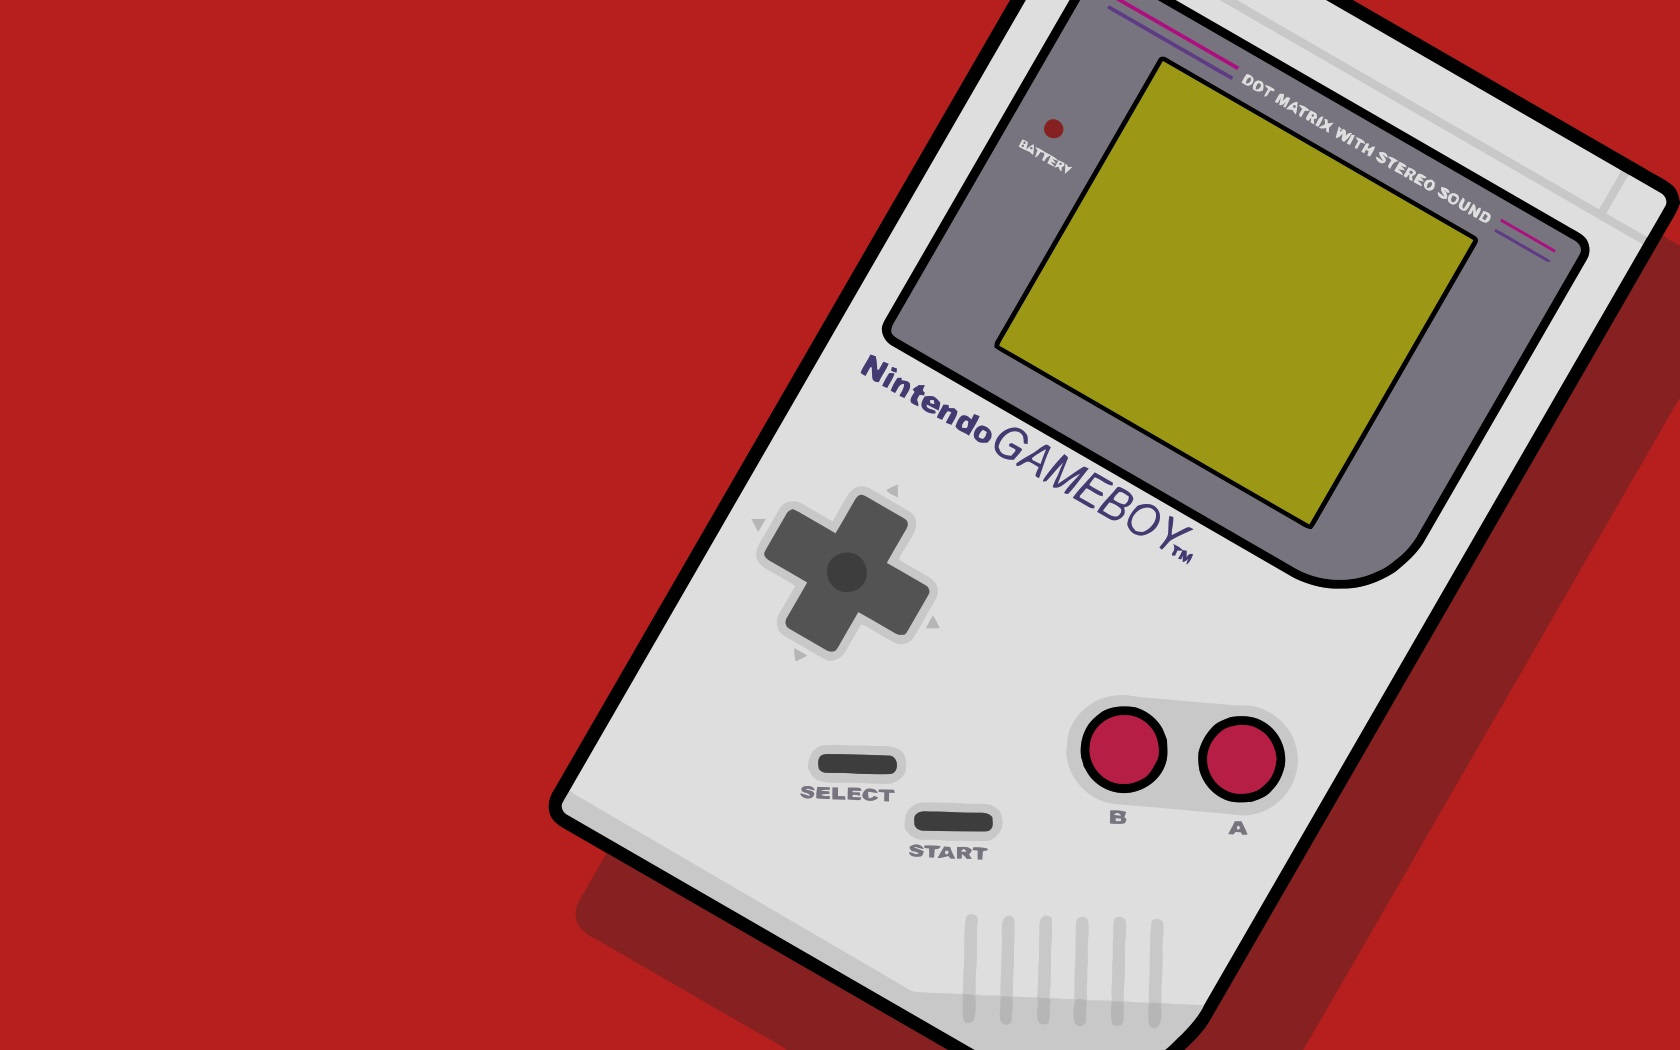 Retro Game Boy Art On Red Backdrop Background